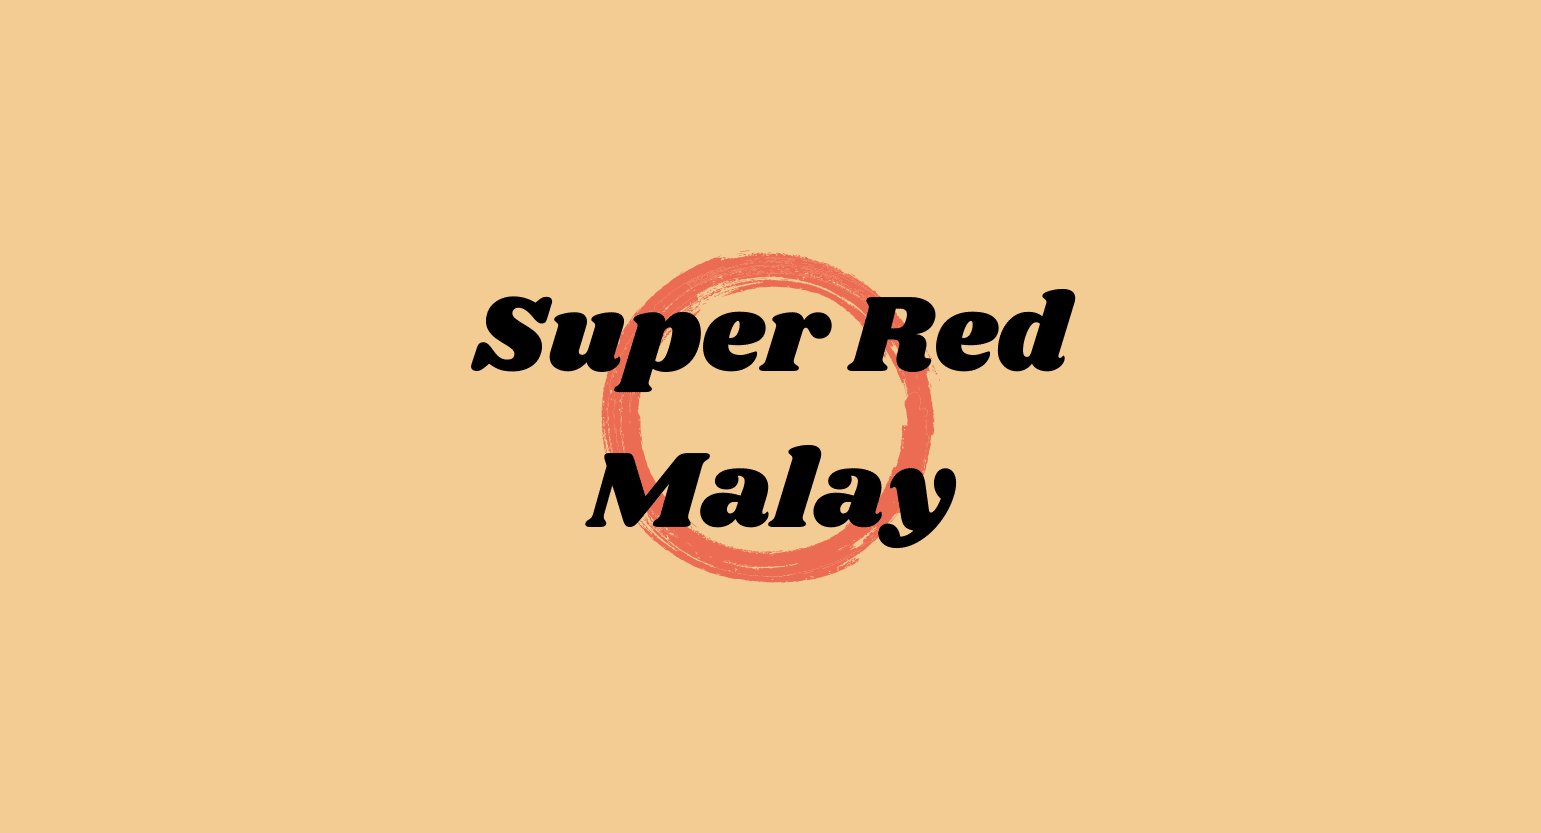 Super Red Malay: Potent Pain Relief and Sedation